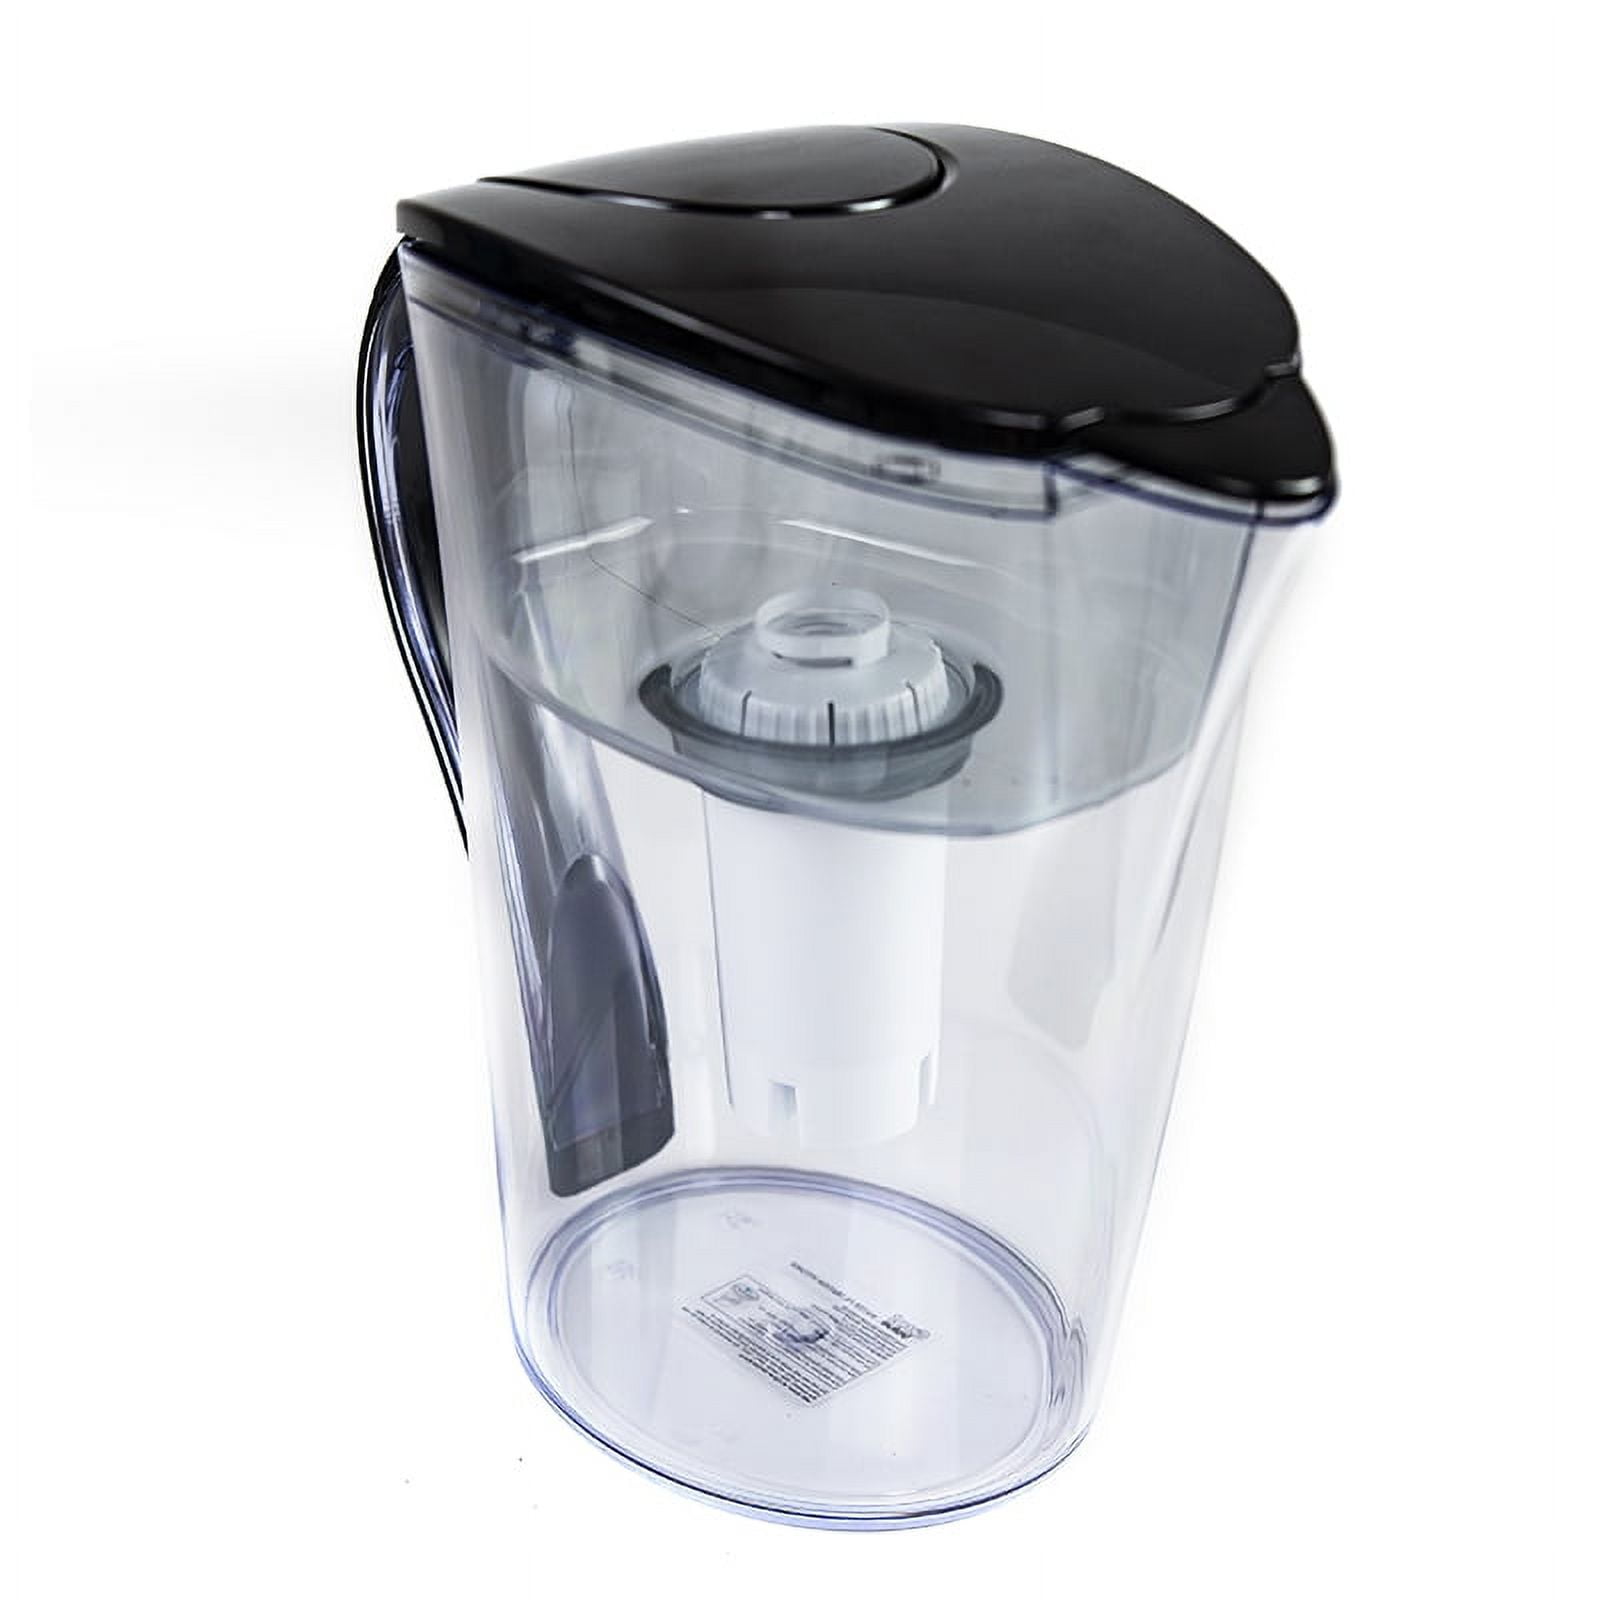 Great Value 10-Cup Water Filter Pitcher Series, Black Color, BPA-Free,  Brita Filter Compatible, Assembled Product Dimensions: 10.8 Length, 10.6